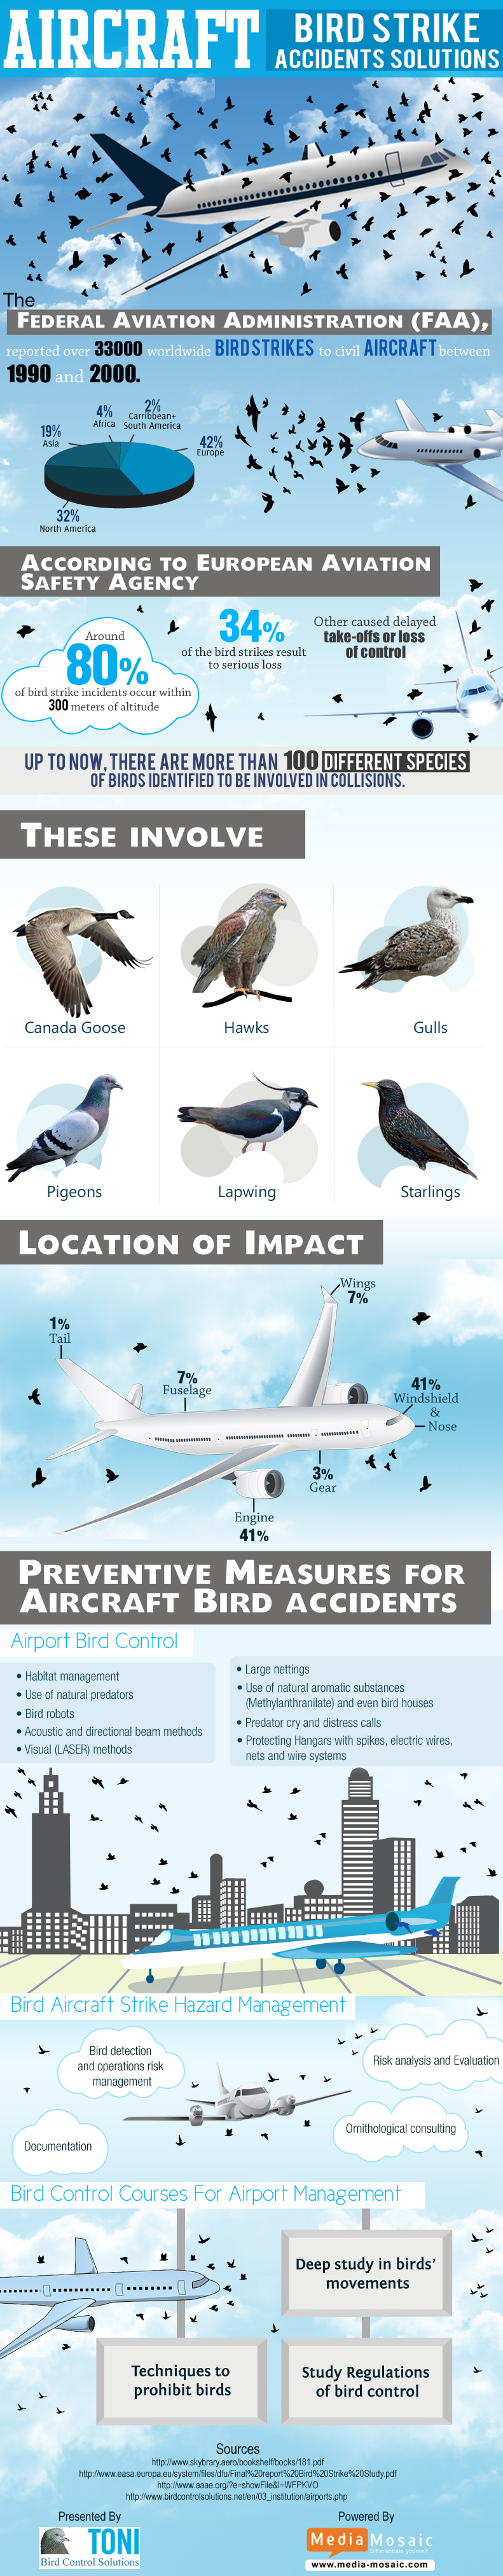 Aircraft-Bird Strike Accidents Solutions